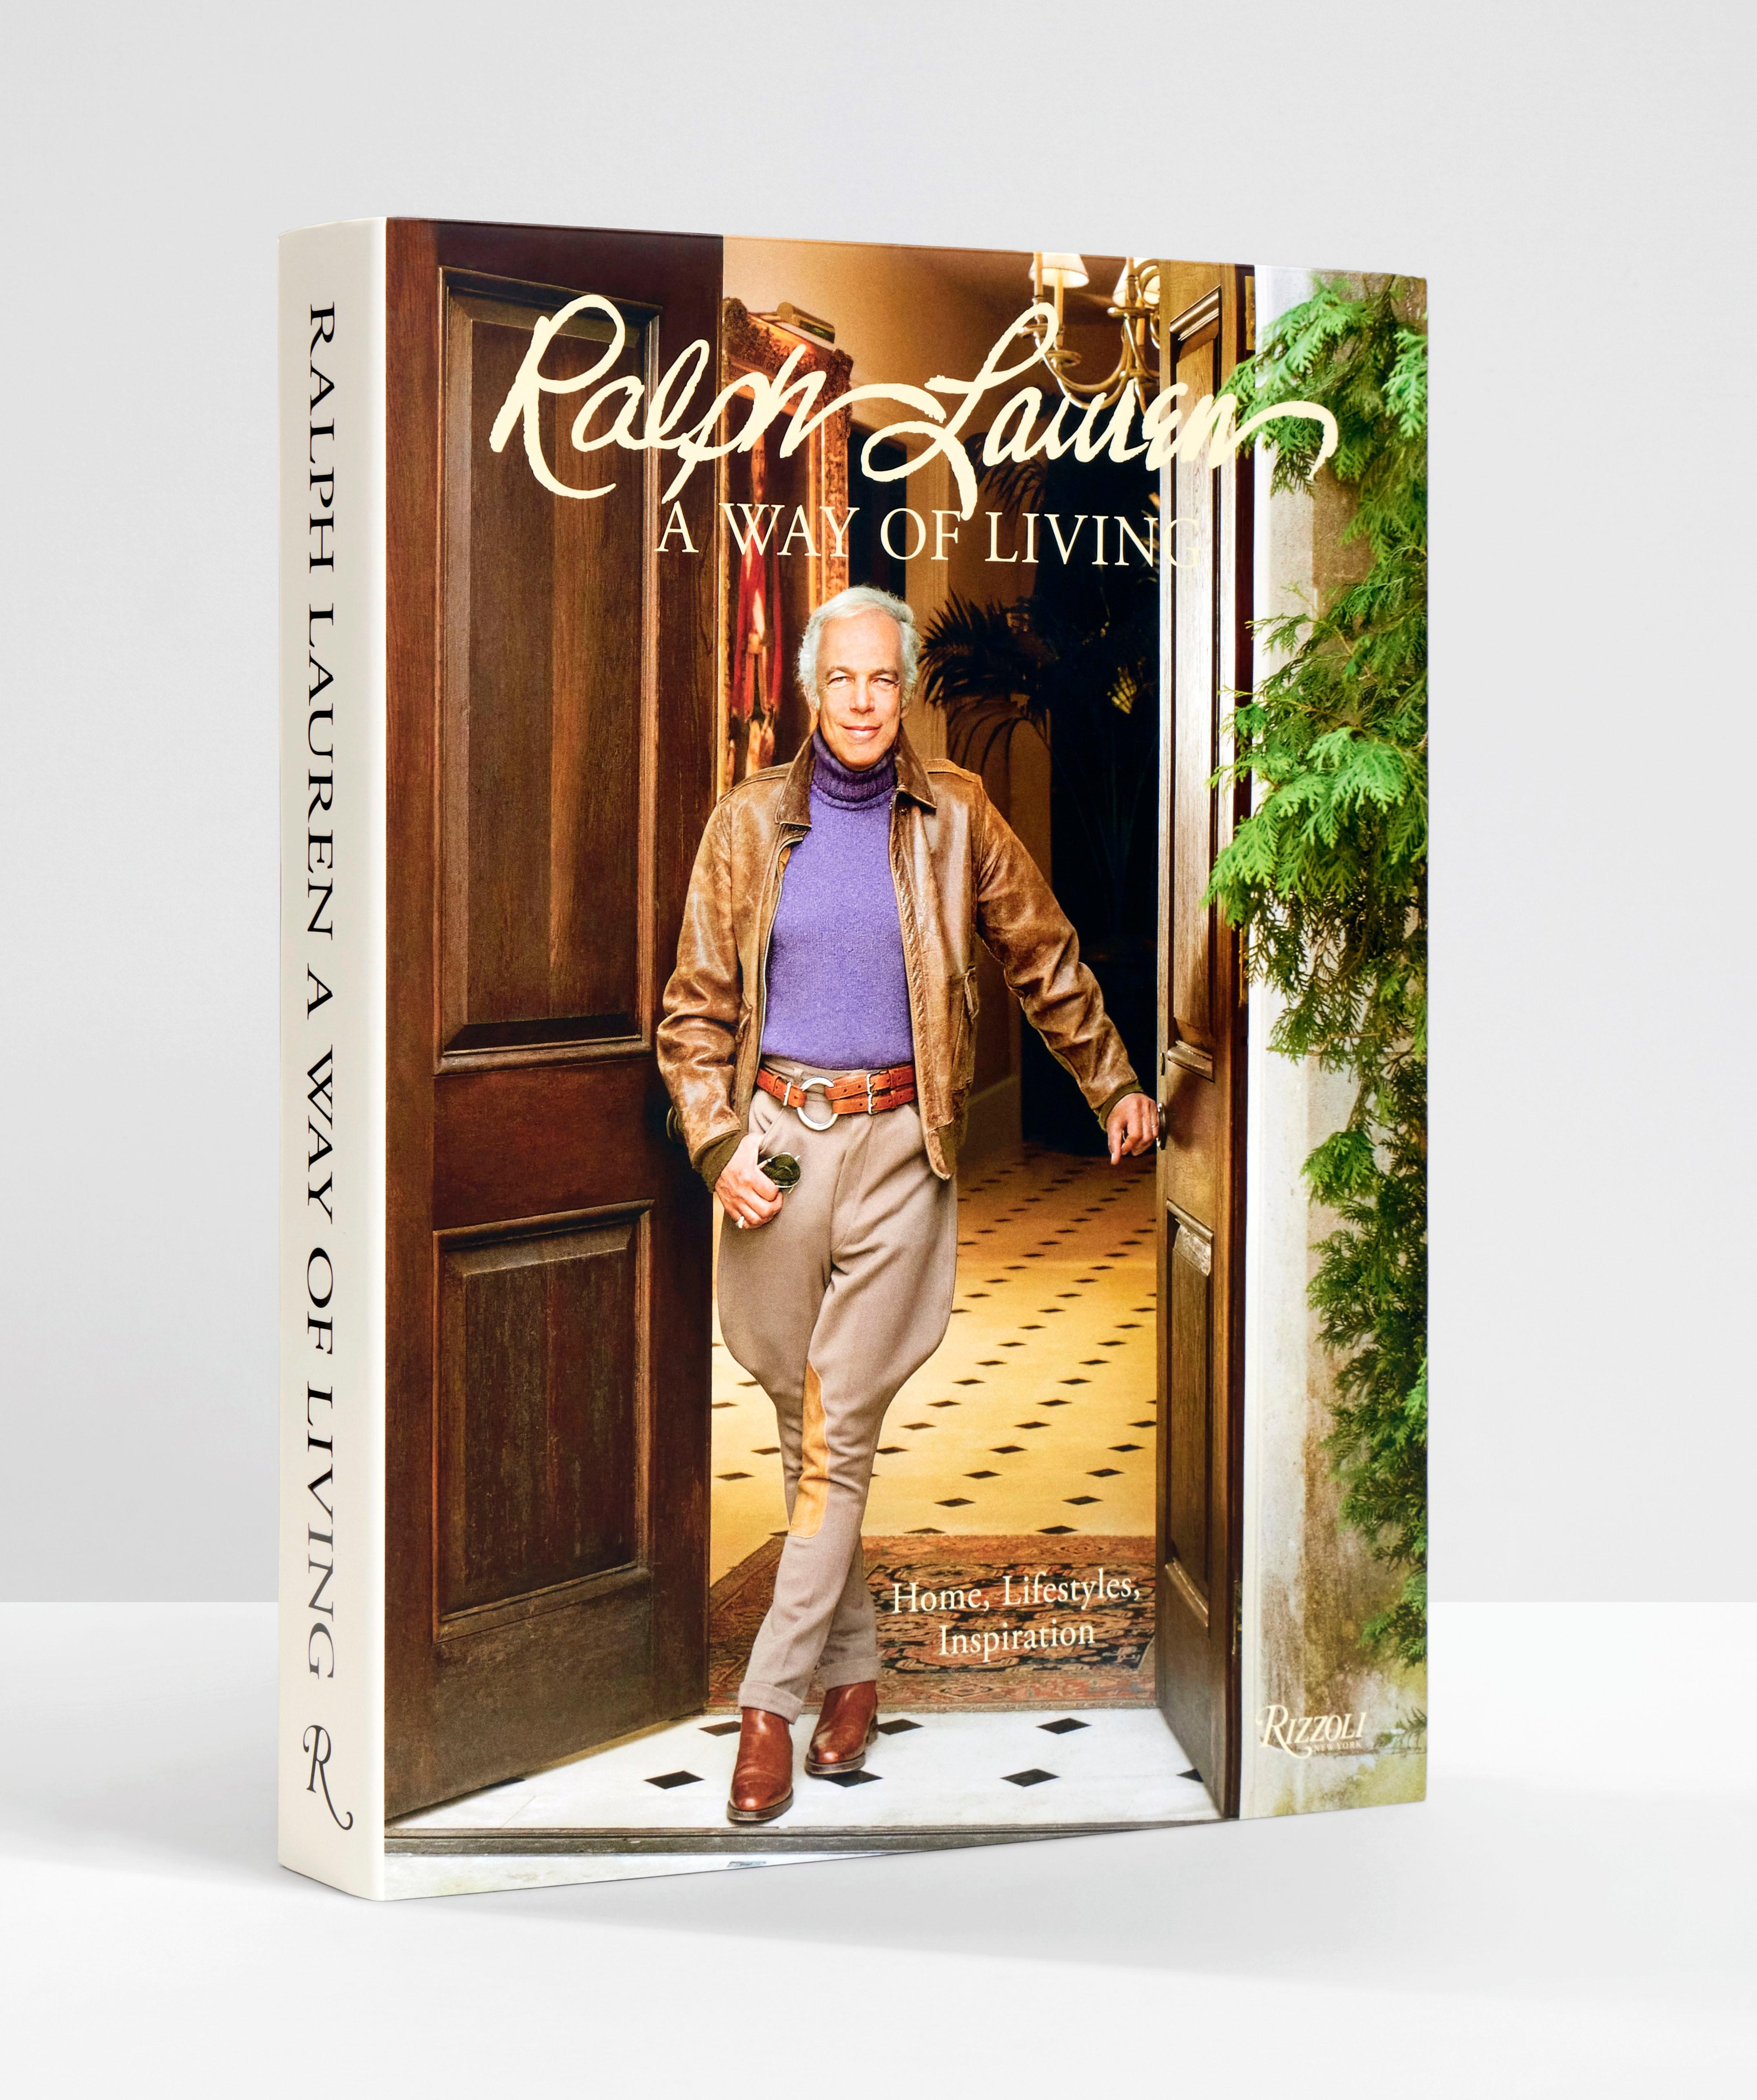 Ralph Lauren A Way of Living: Home, Design, Inspiration
Author Ralph Lauren

A stunning celebration of Ralph Lauren’s signature home collections—including the designer’s own homes—which have inspired the world of interior design for nearly half a